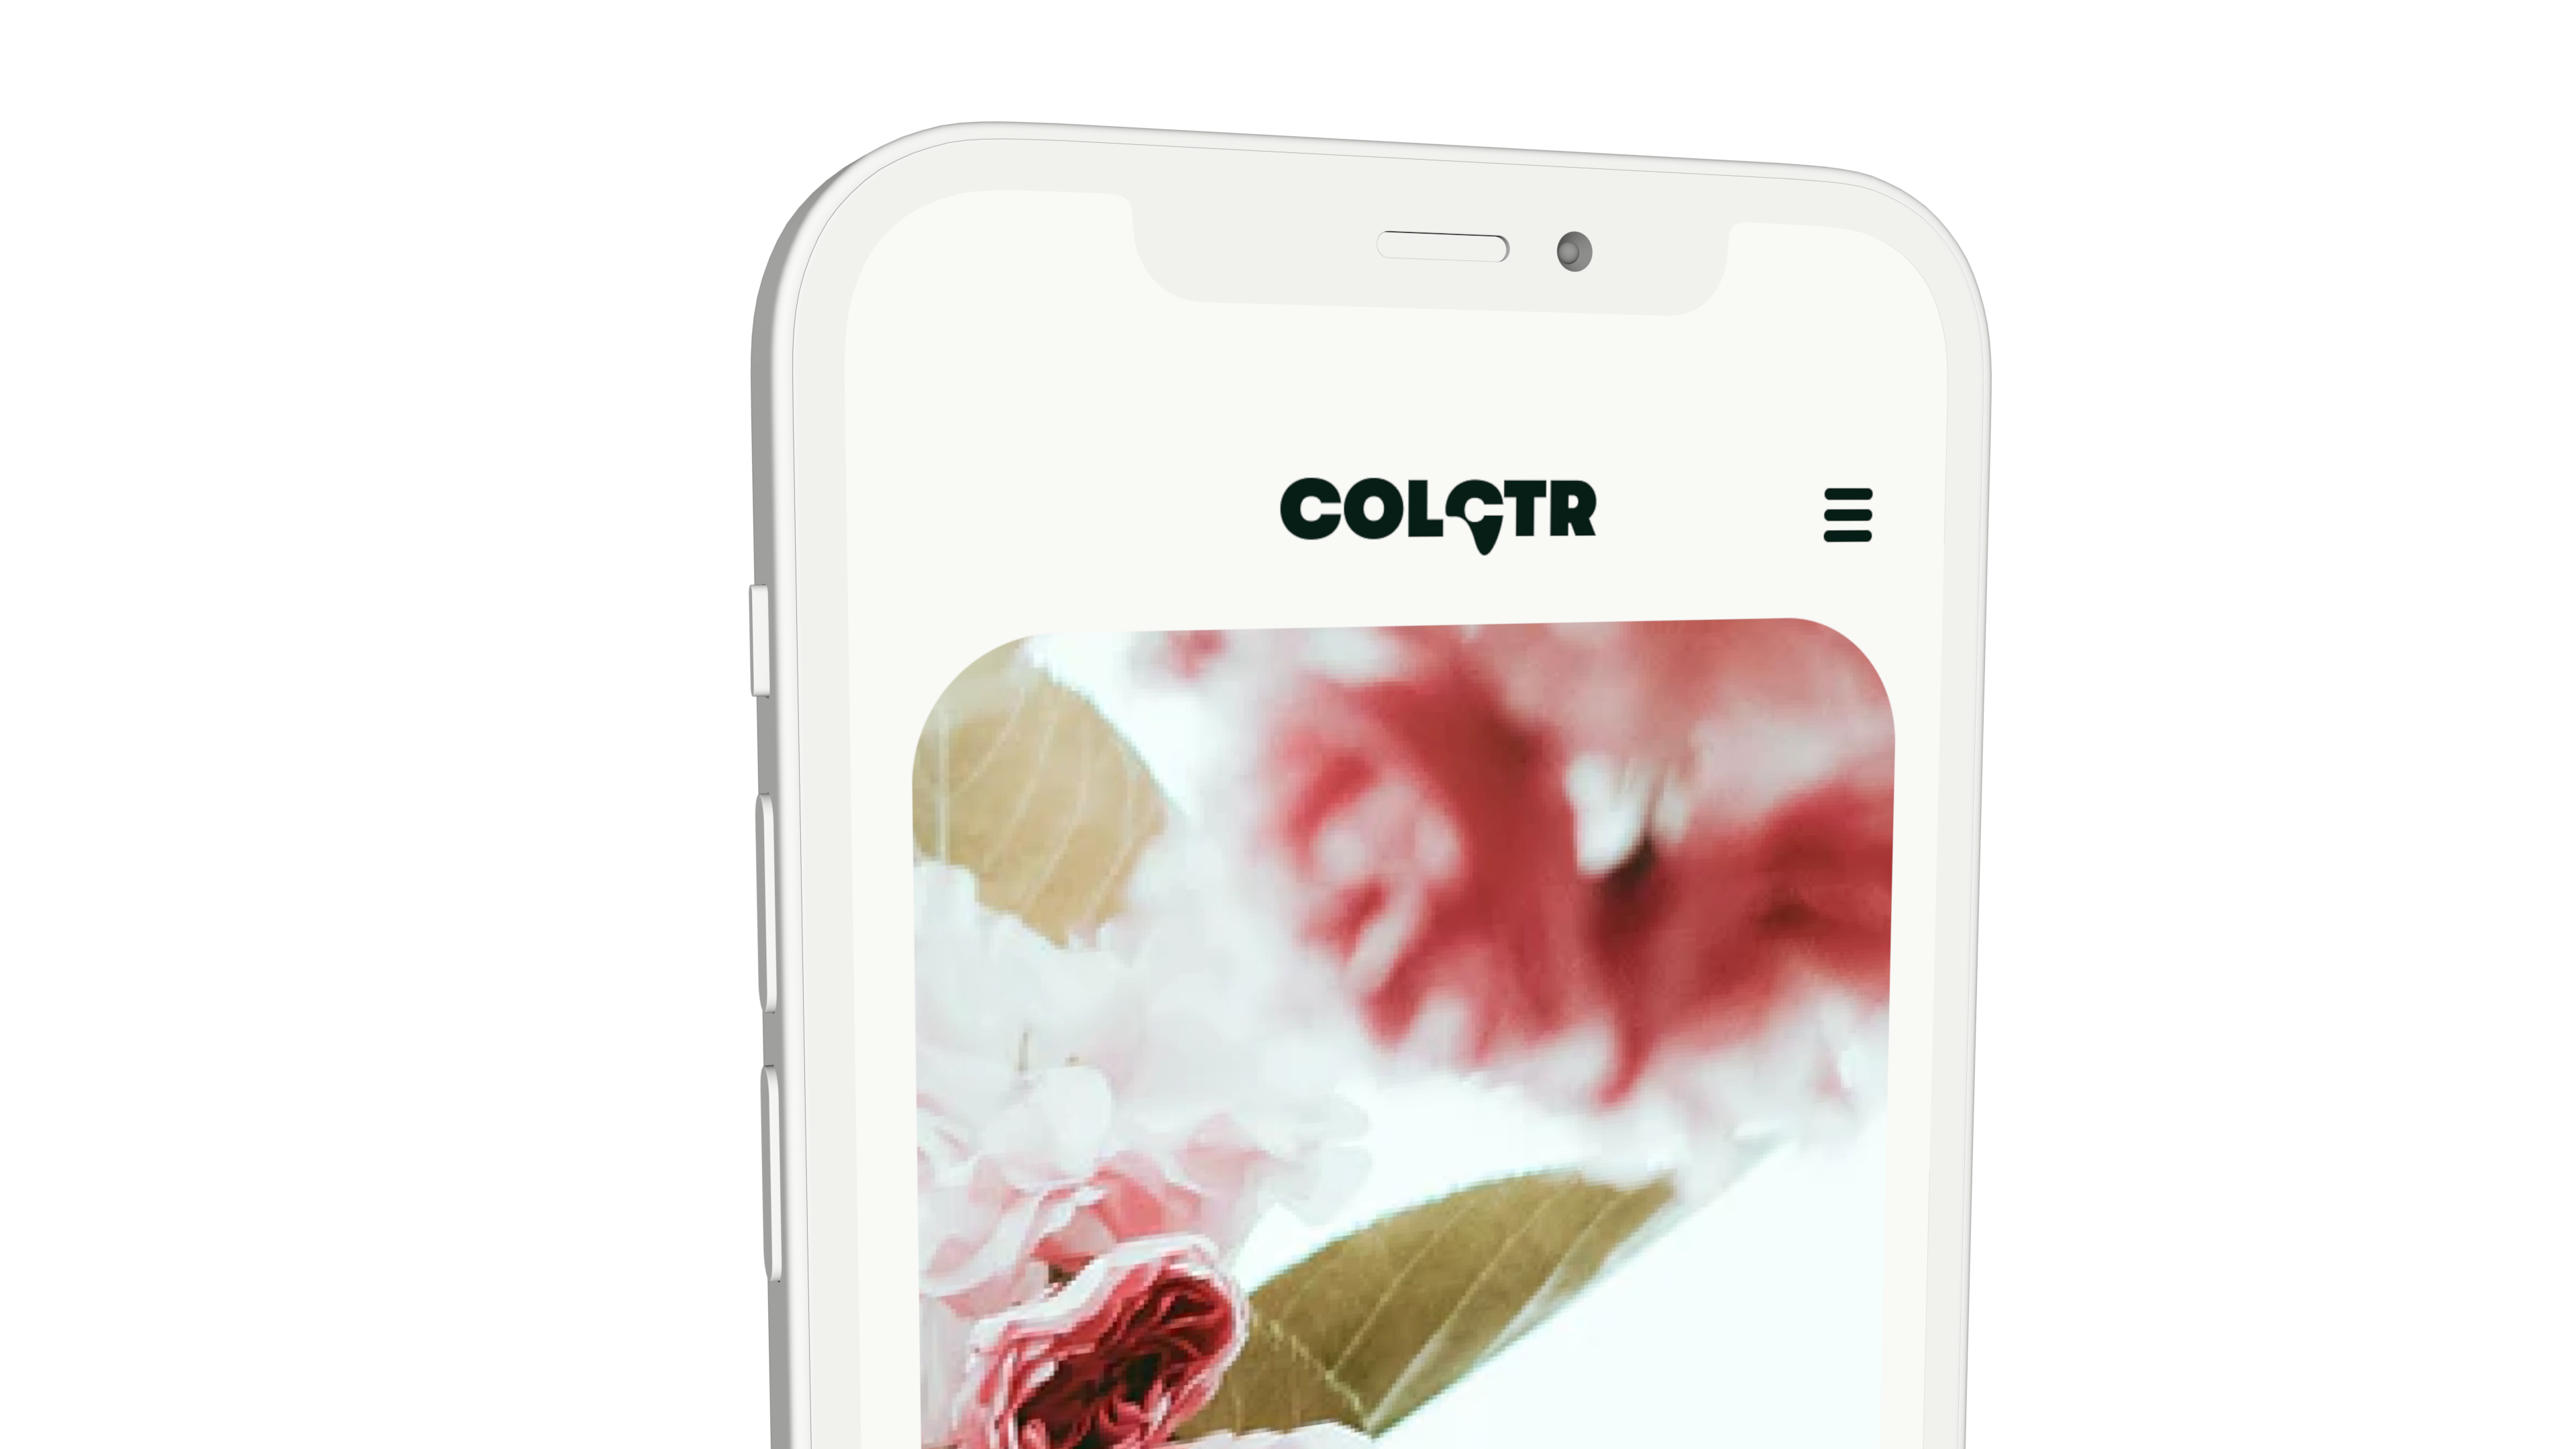 White device frame with slick design on the display